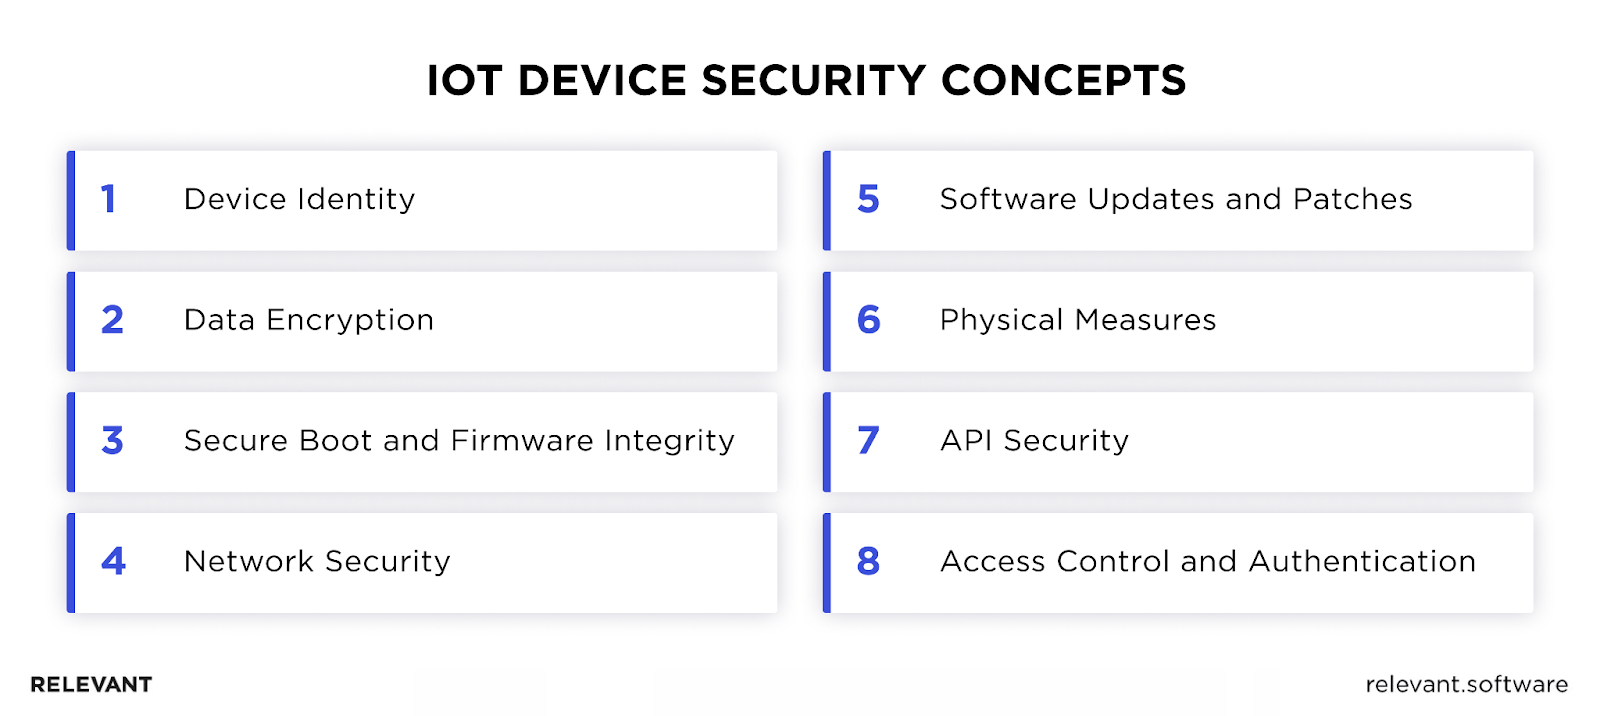 IoT Device Security Concepts